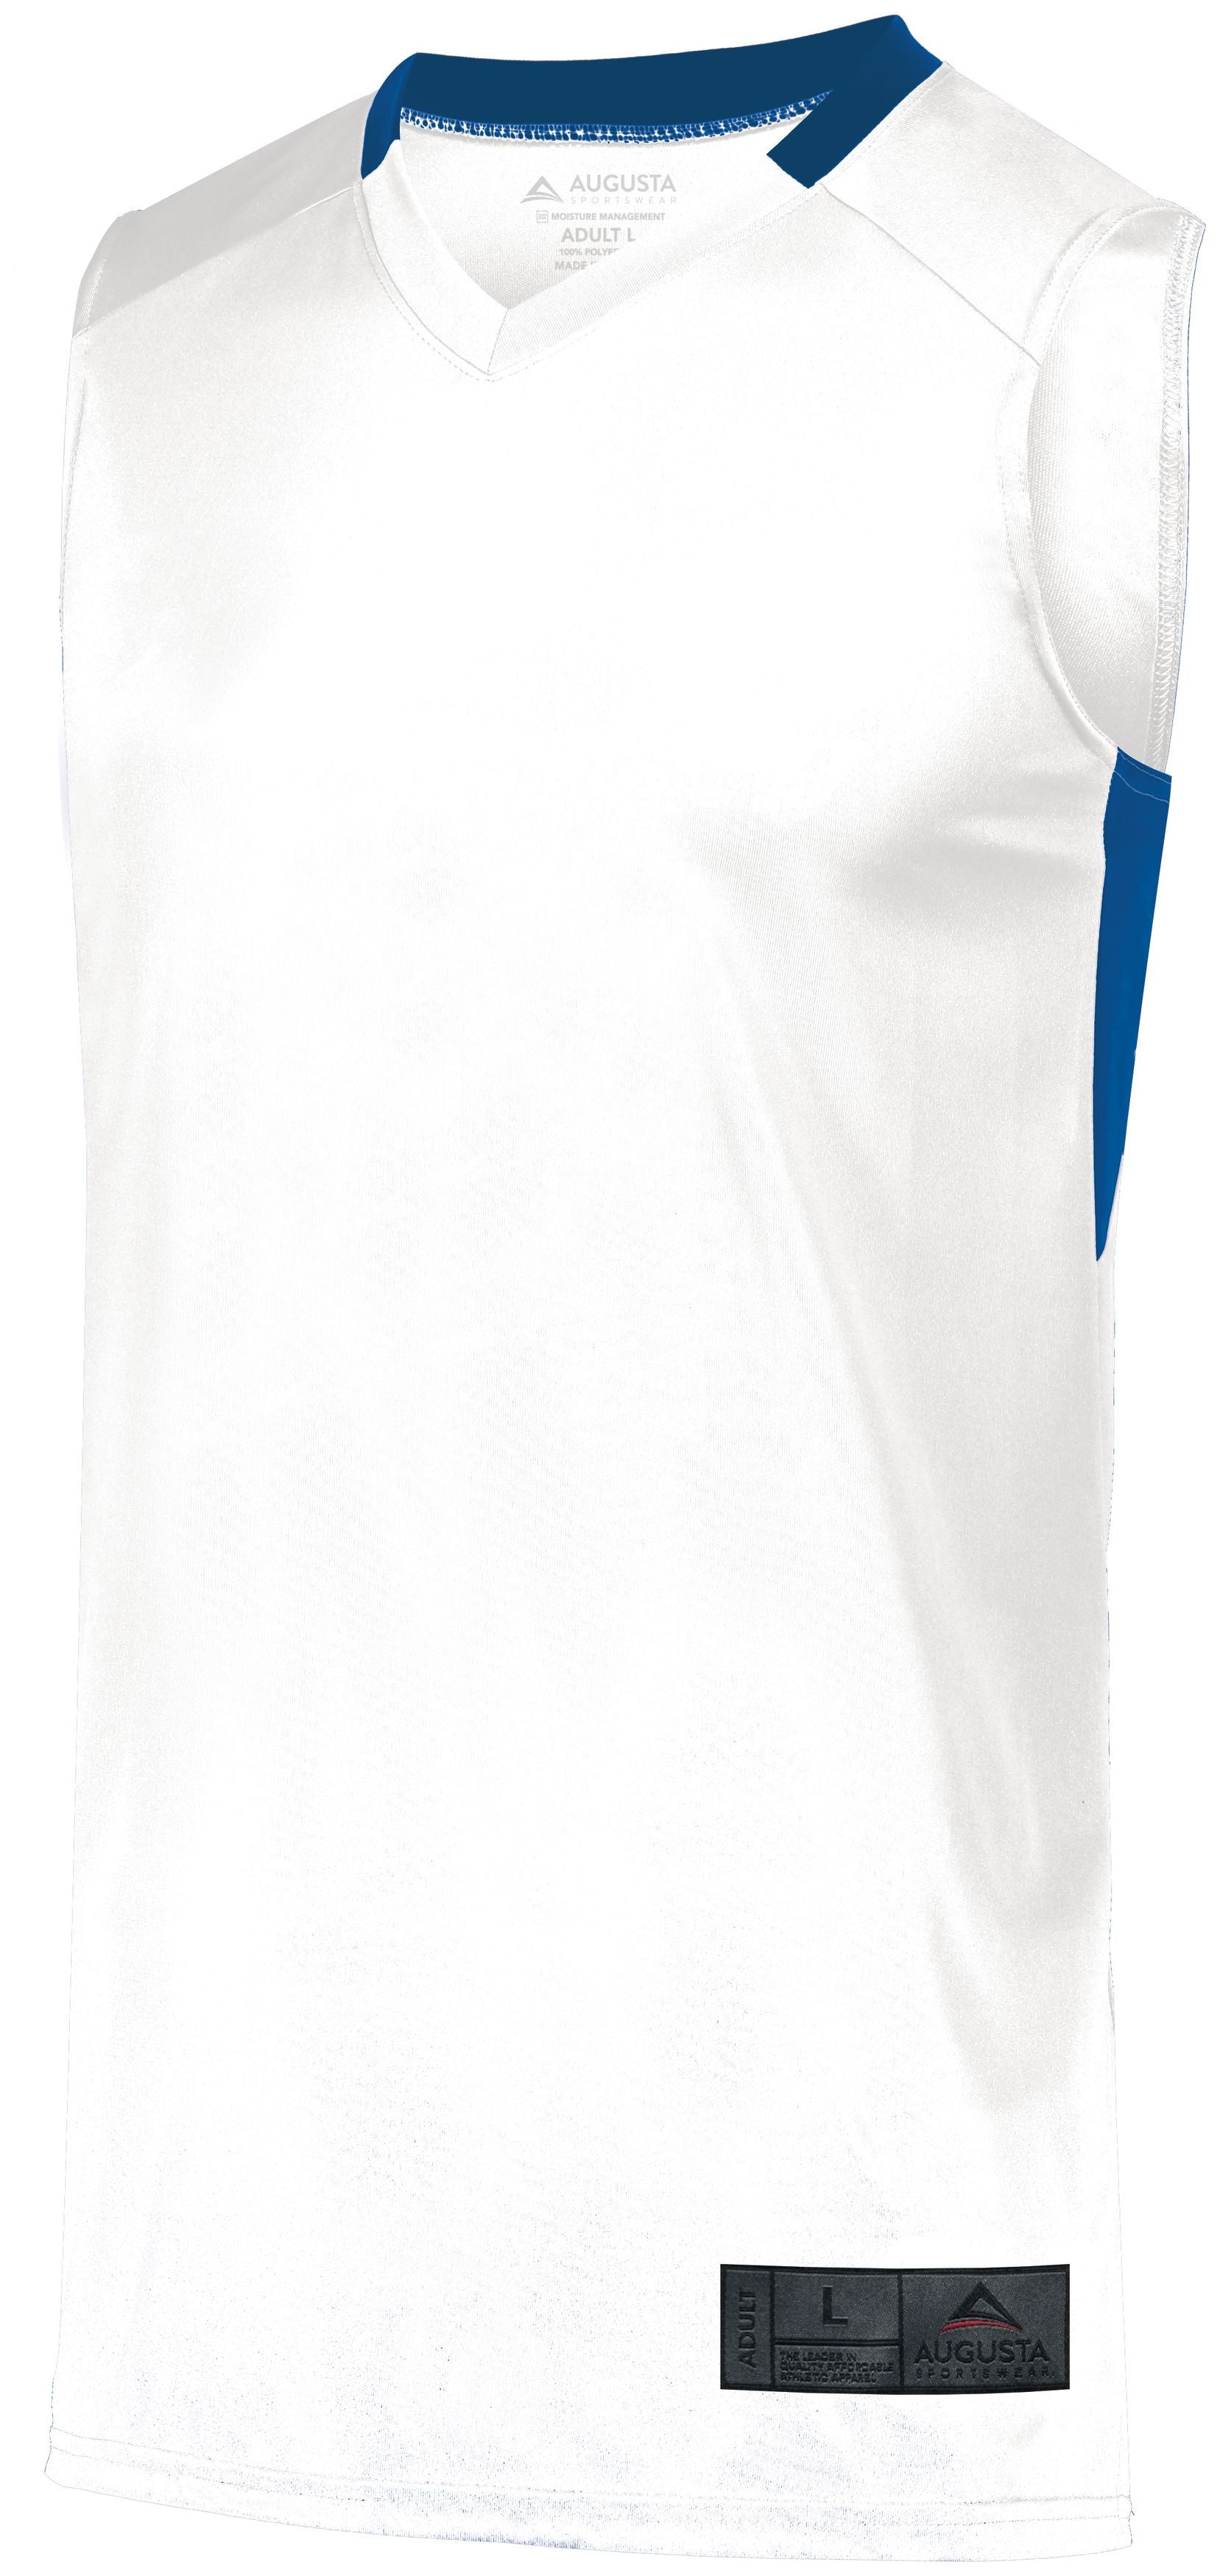 Augusta Sportswear Step-Back Basketball Jersey in White/Royal  -Part of the Adult, Adult-Jersey, Augusta-Products, Basketball, Shirts, All-Sports, All-Sports-1 product lines at KanaleyCreations.com